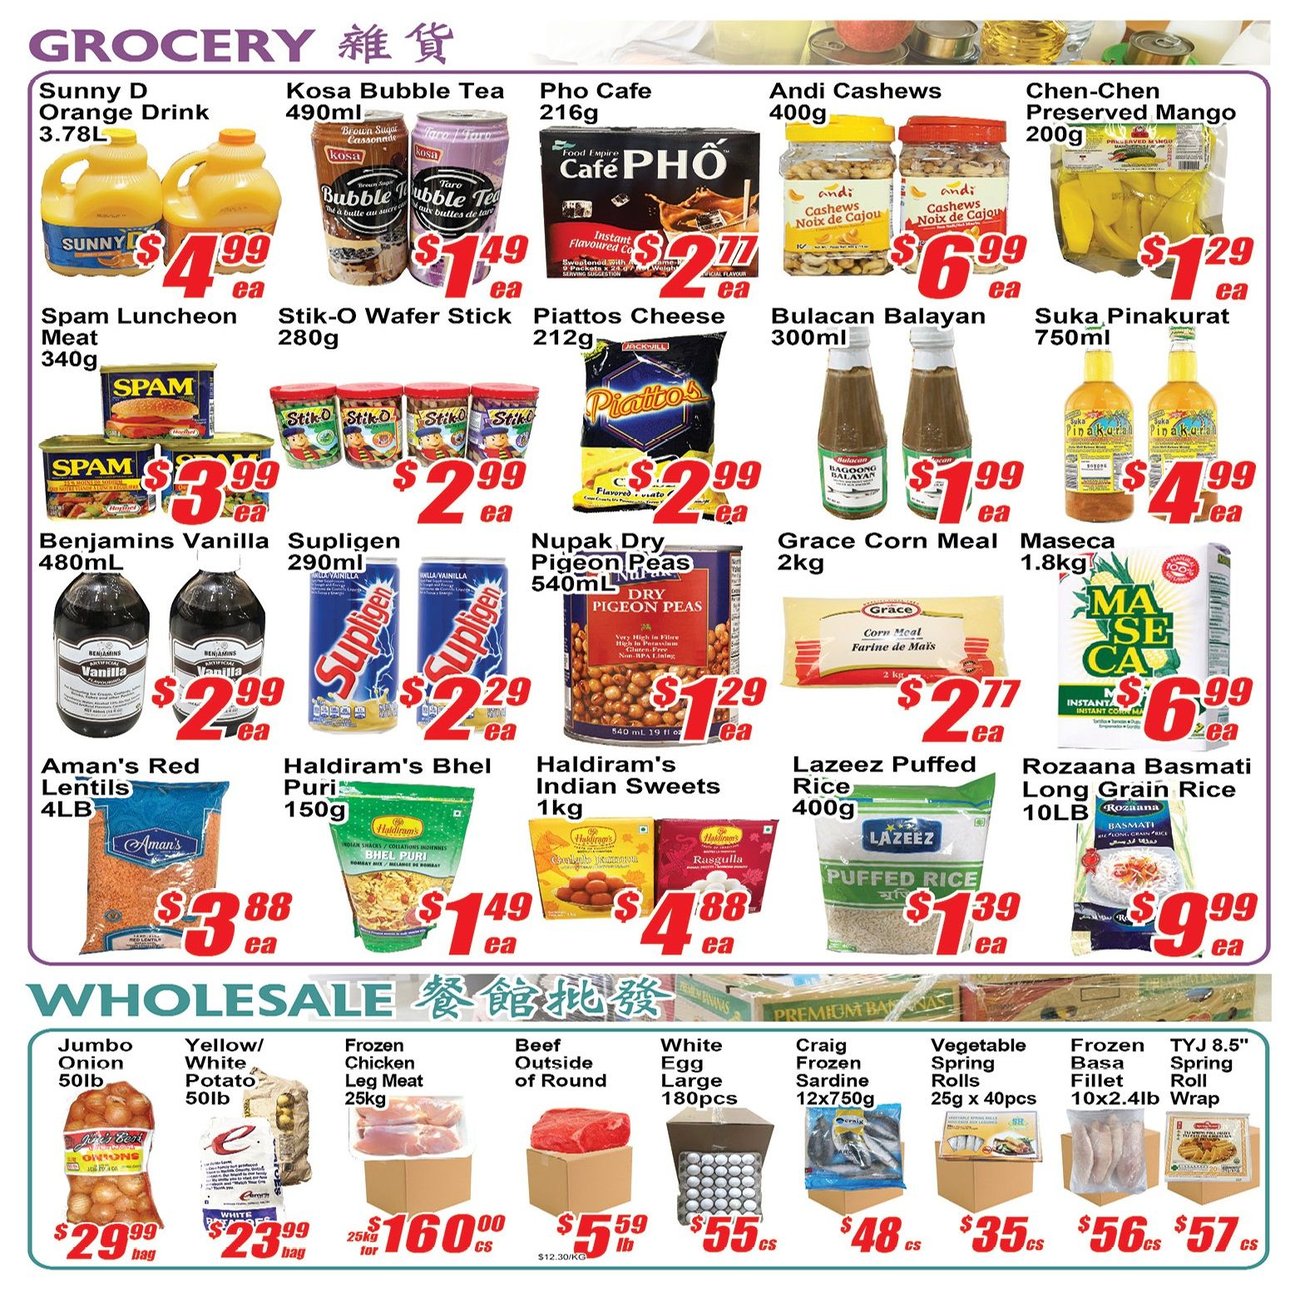 Jian Hing Supermarket - Scarborough Store - Weekly Flyer Specials - Page 2